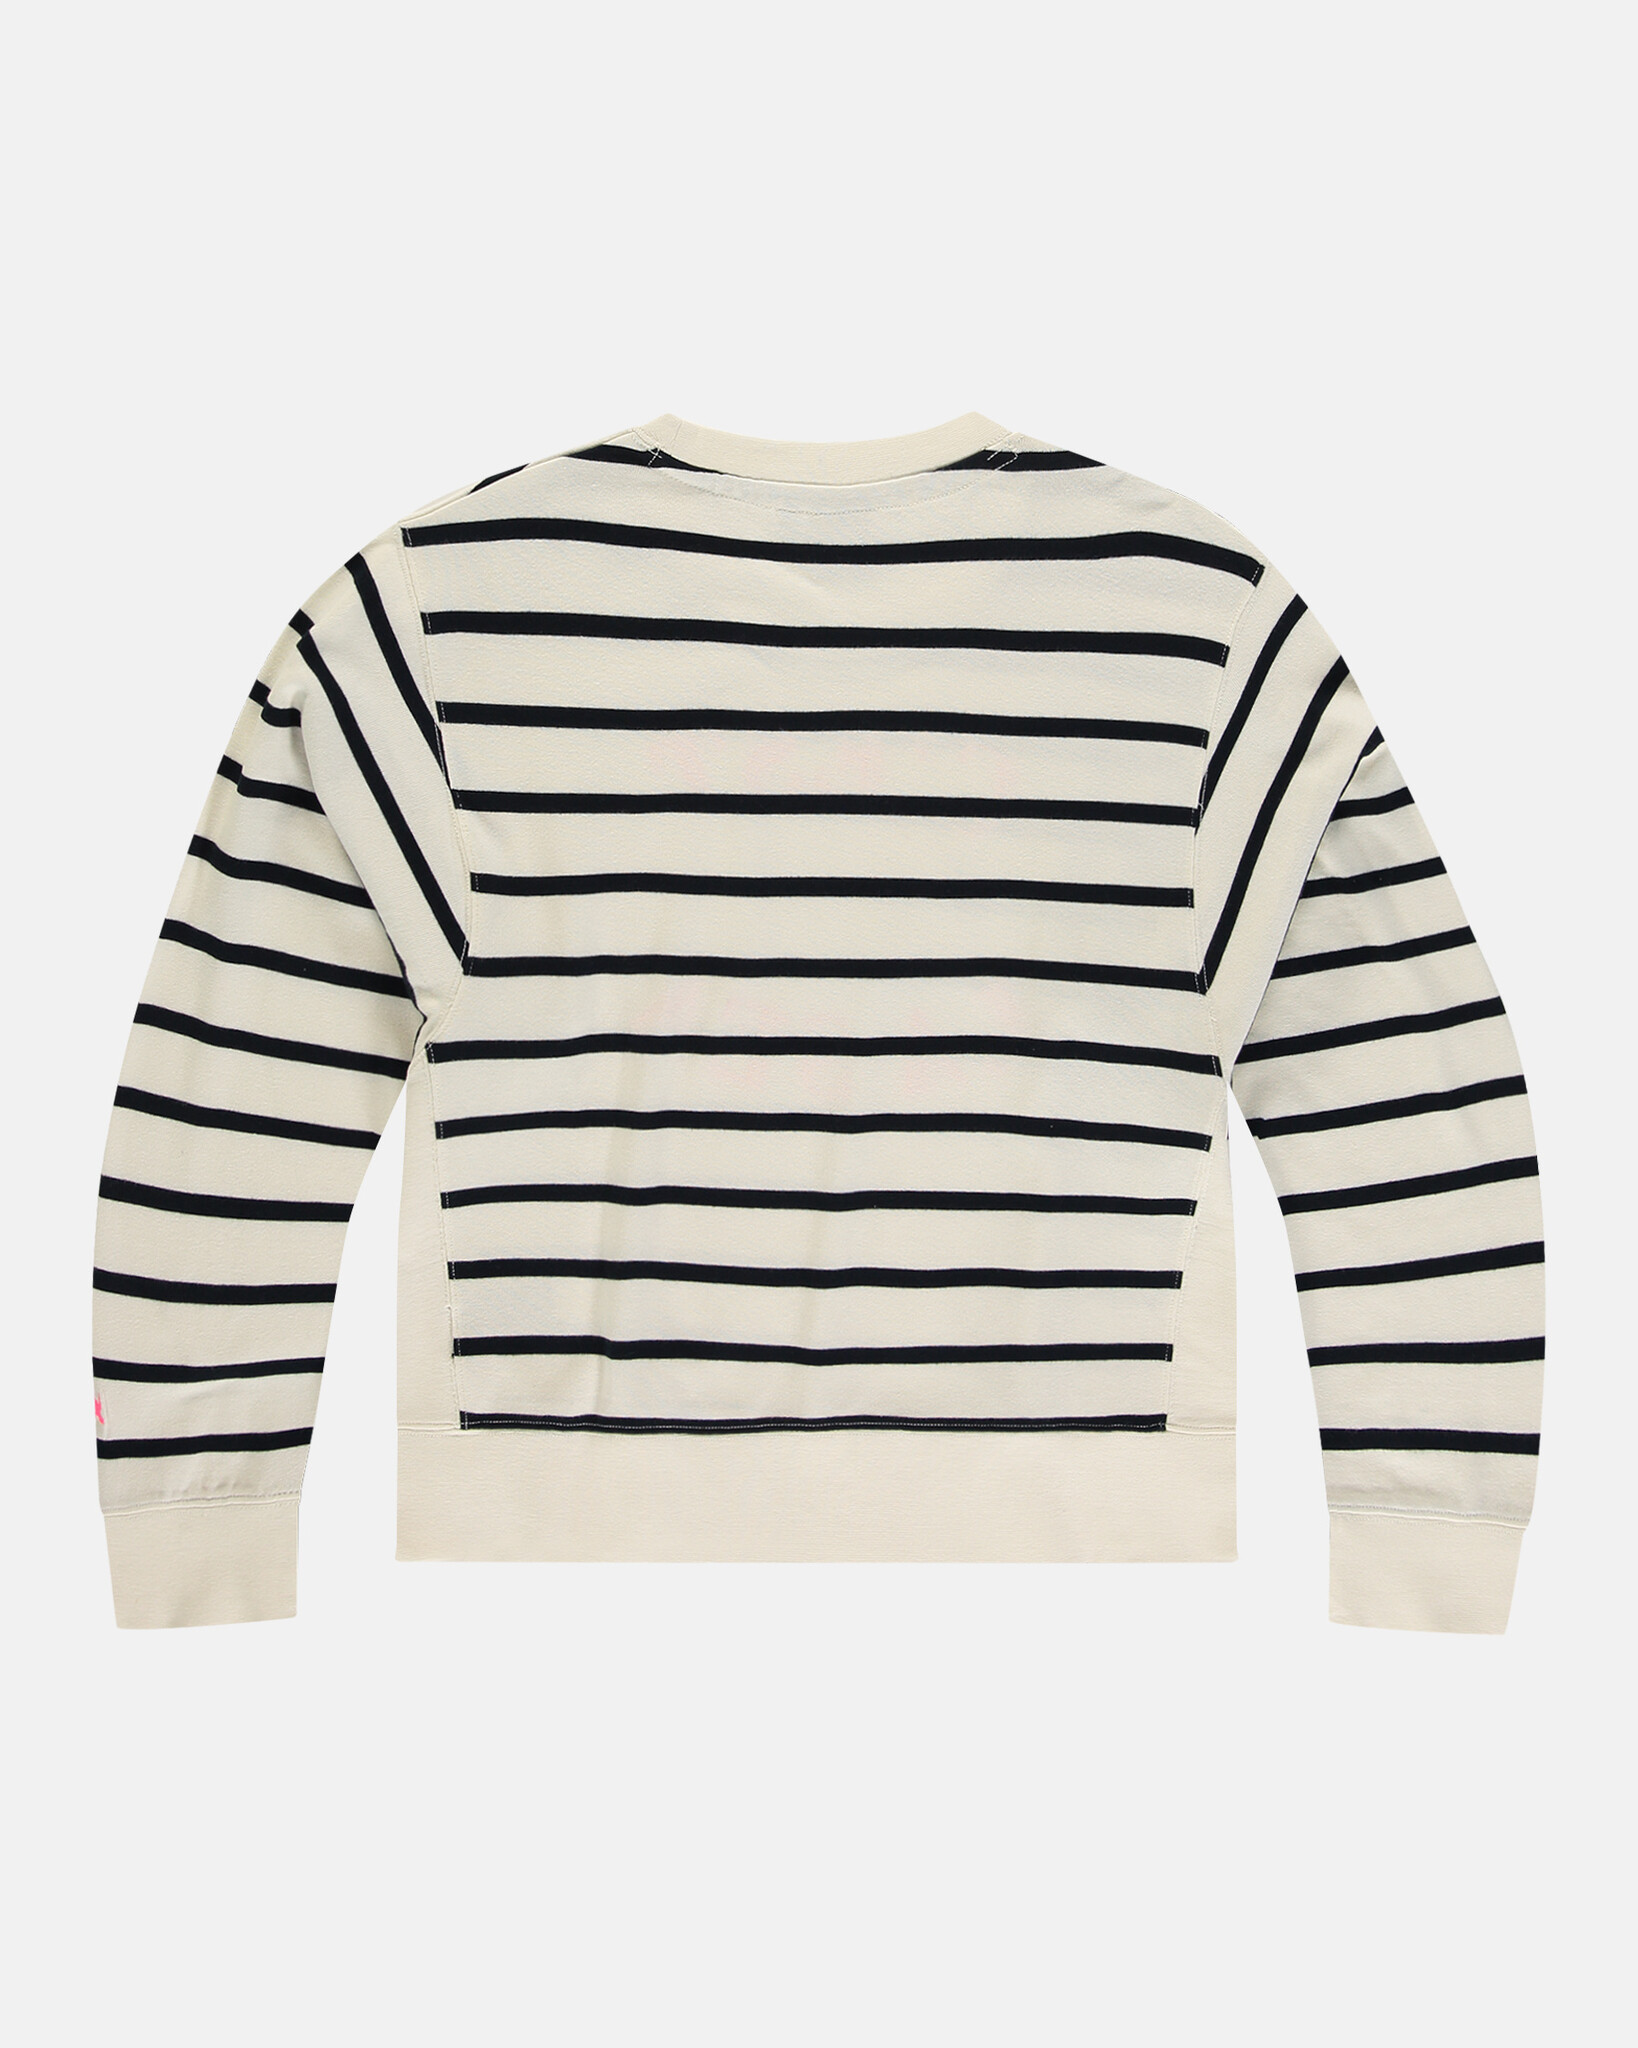 yarn dyed stripe heavy jersey round neck sweater with dropped shoulders and eye catching artwork